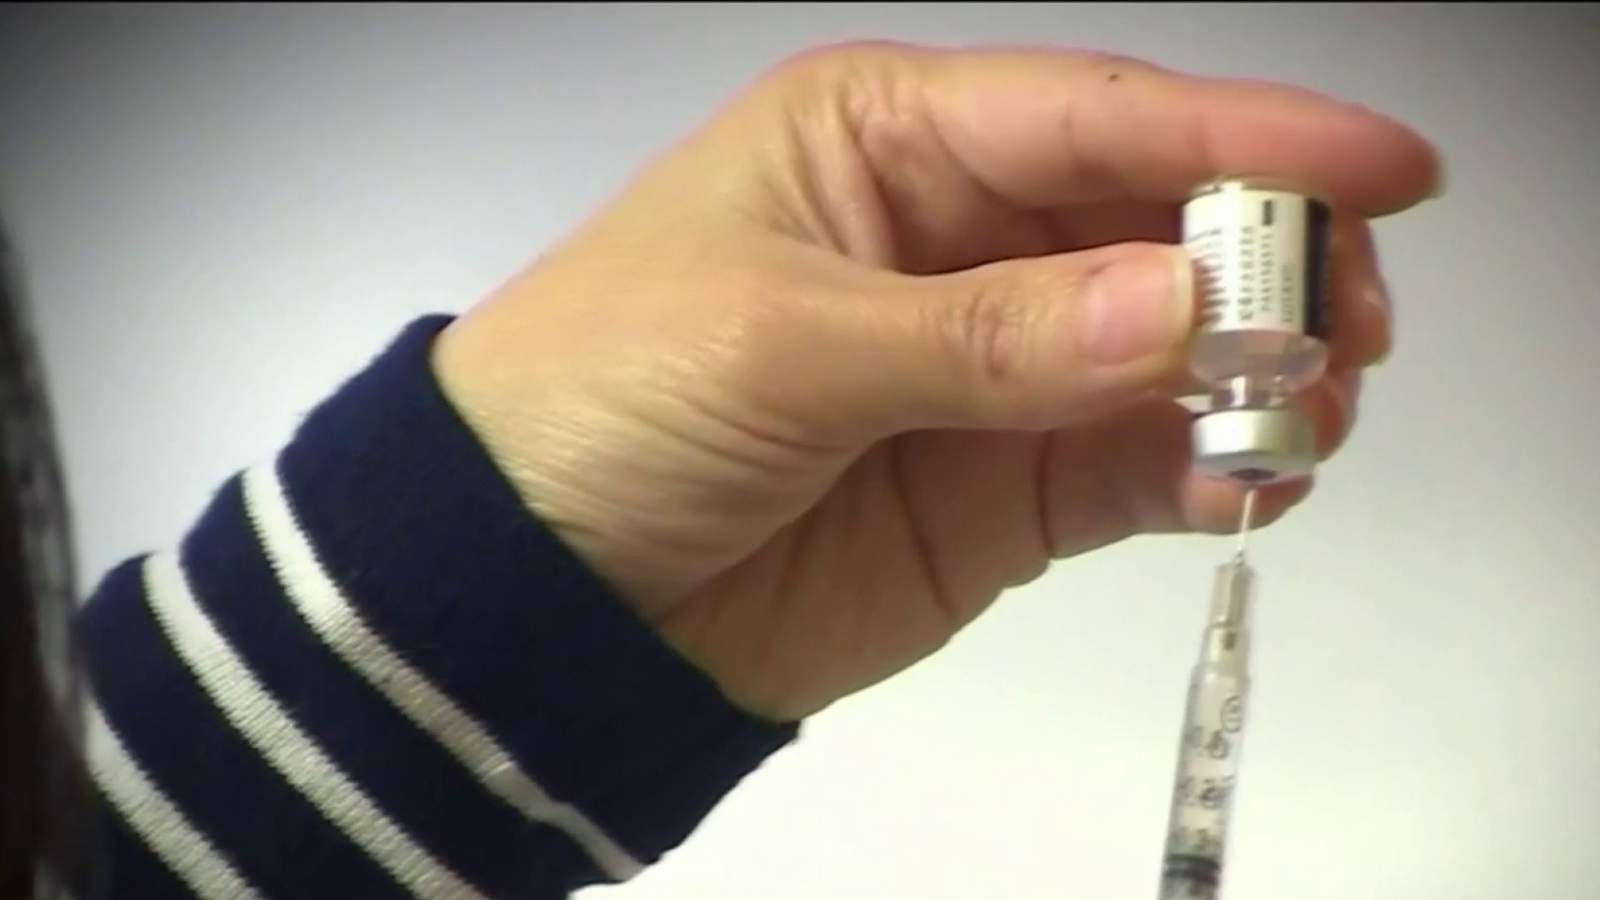 Do fully vaccinated people still have quarantine after COVID-19 exposure? - WDIV ClickOnDetroit